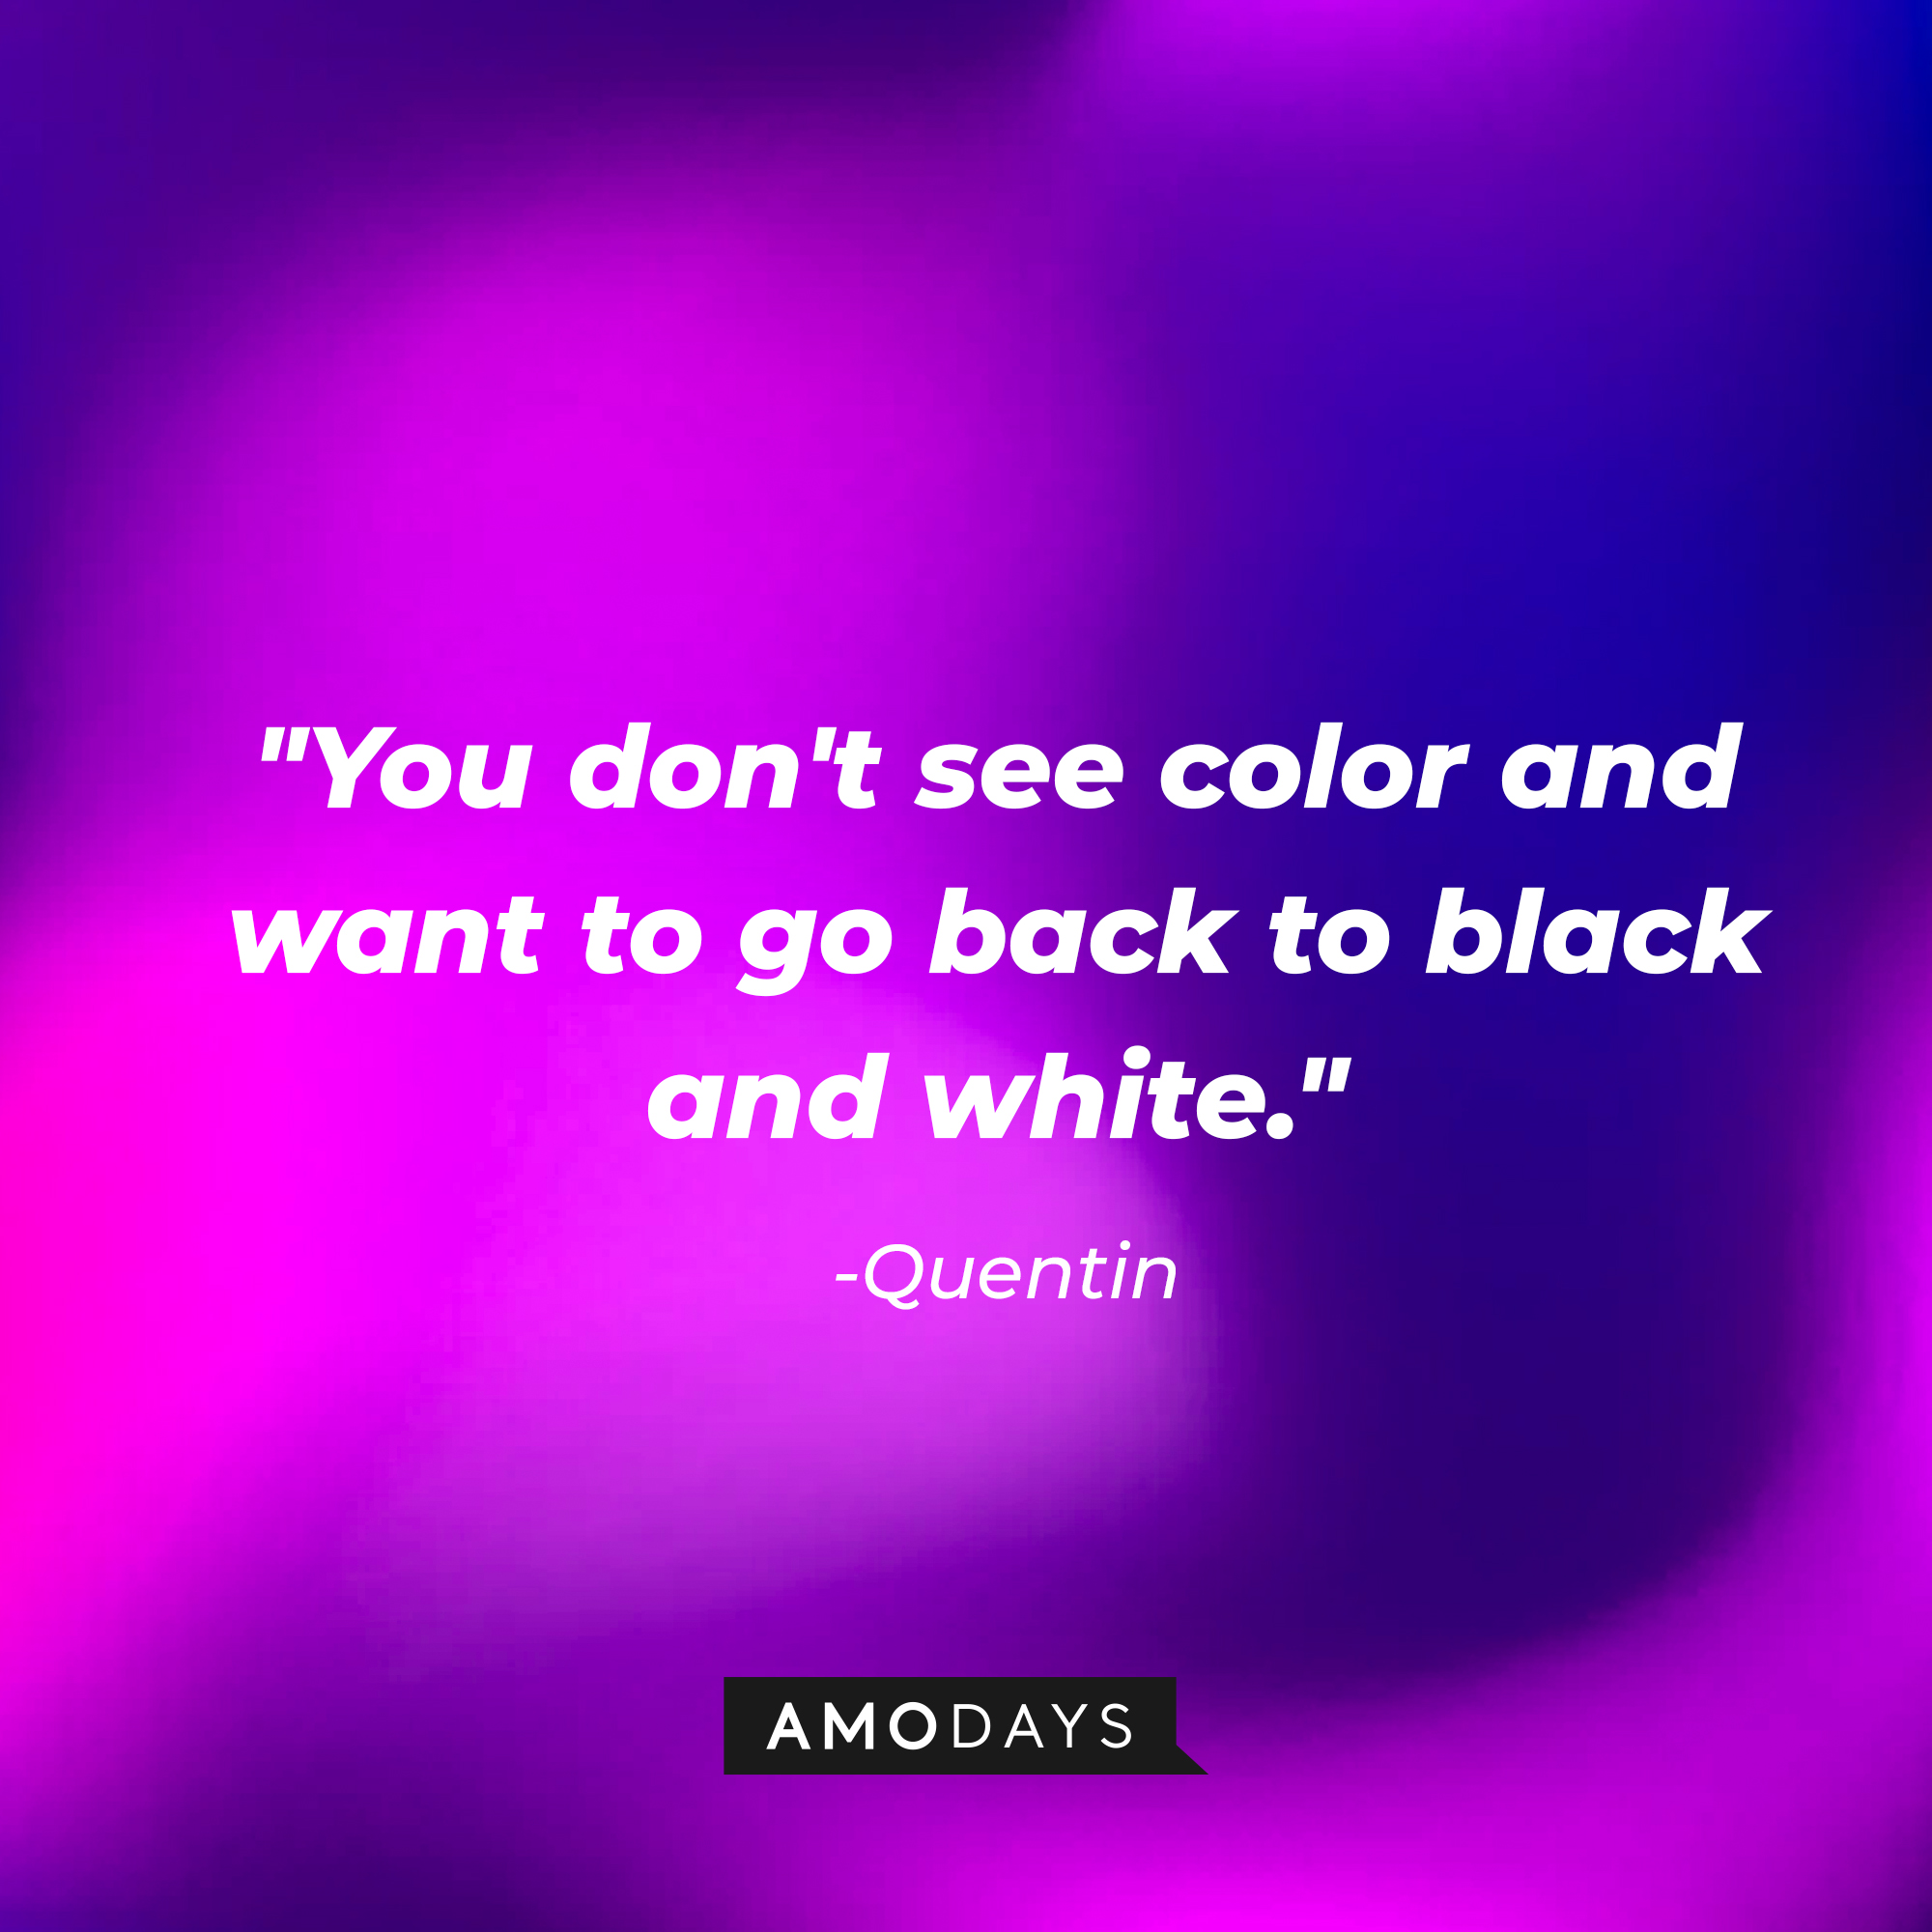 Quentin’s quotes: "You don't see color and want to go back to black and white." | Source: AmoDays